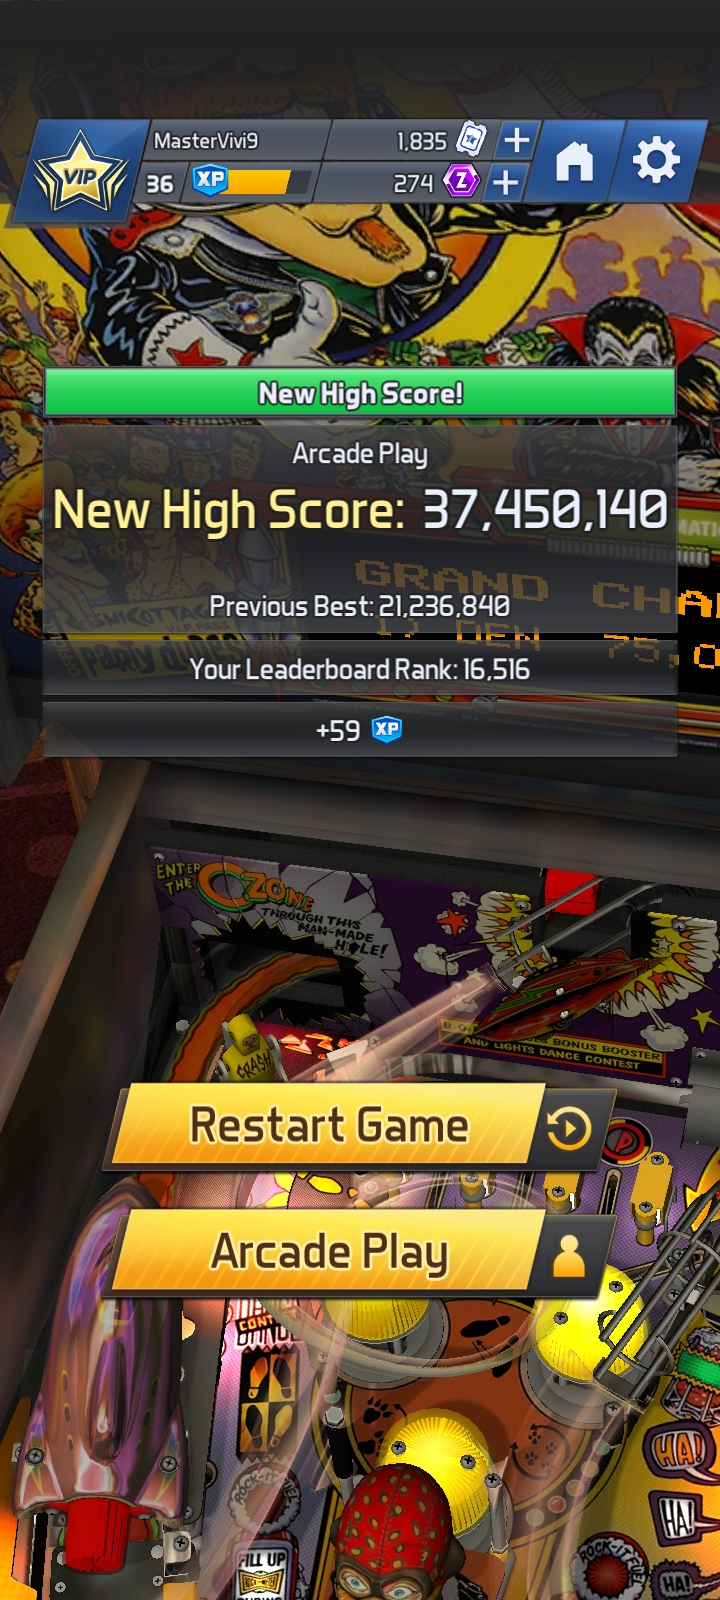 Hauntedprogram: Williams Pinball: Party Zone [Arcade Play] (Android) 37,450,140 points on 2022-10-21 21:30:17